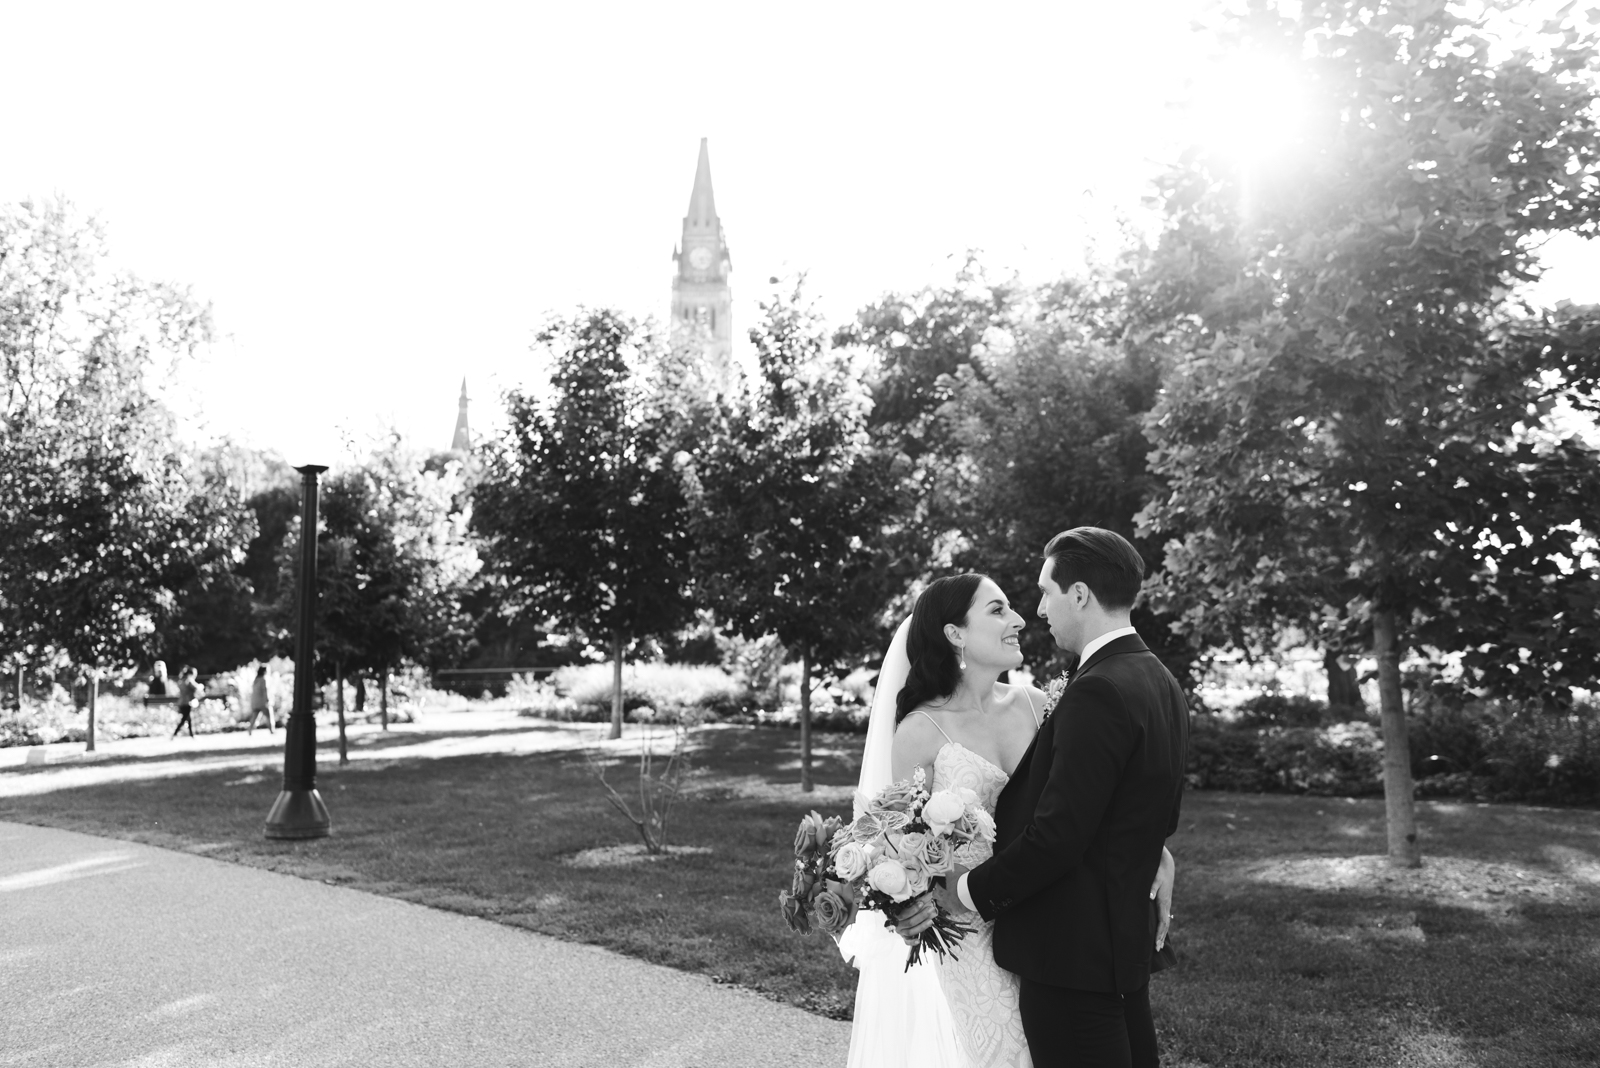 bride and groom in majors hill park with parliament in the background in black and white